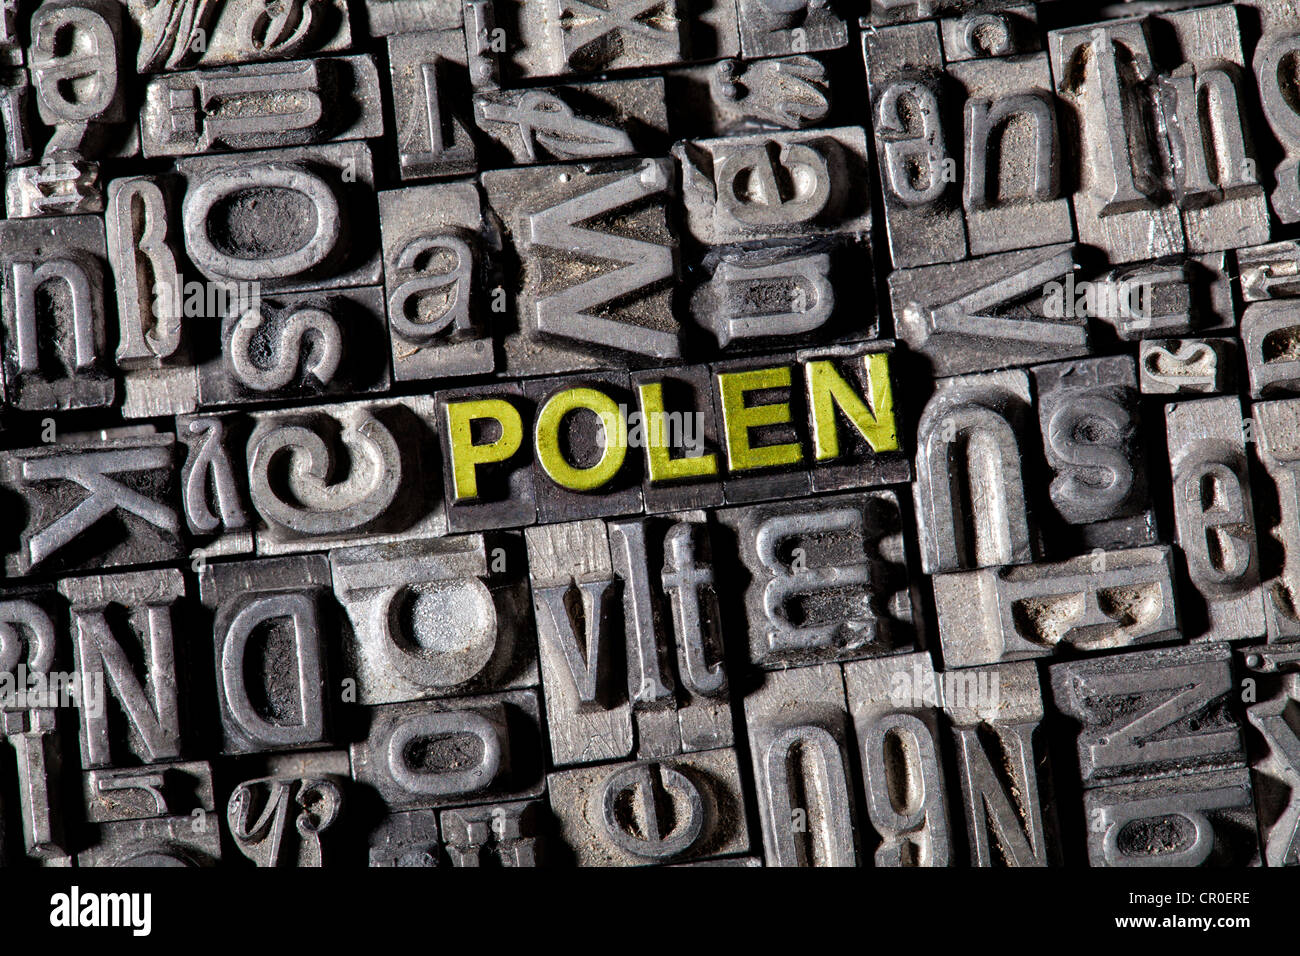 Old lead letters forming the word Polen, German for Poland Stock Photo